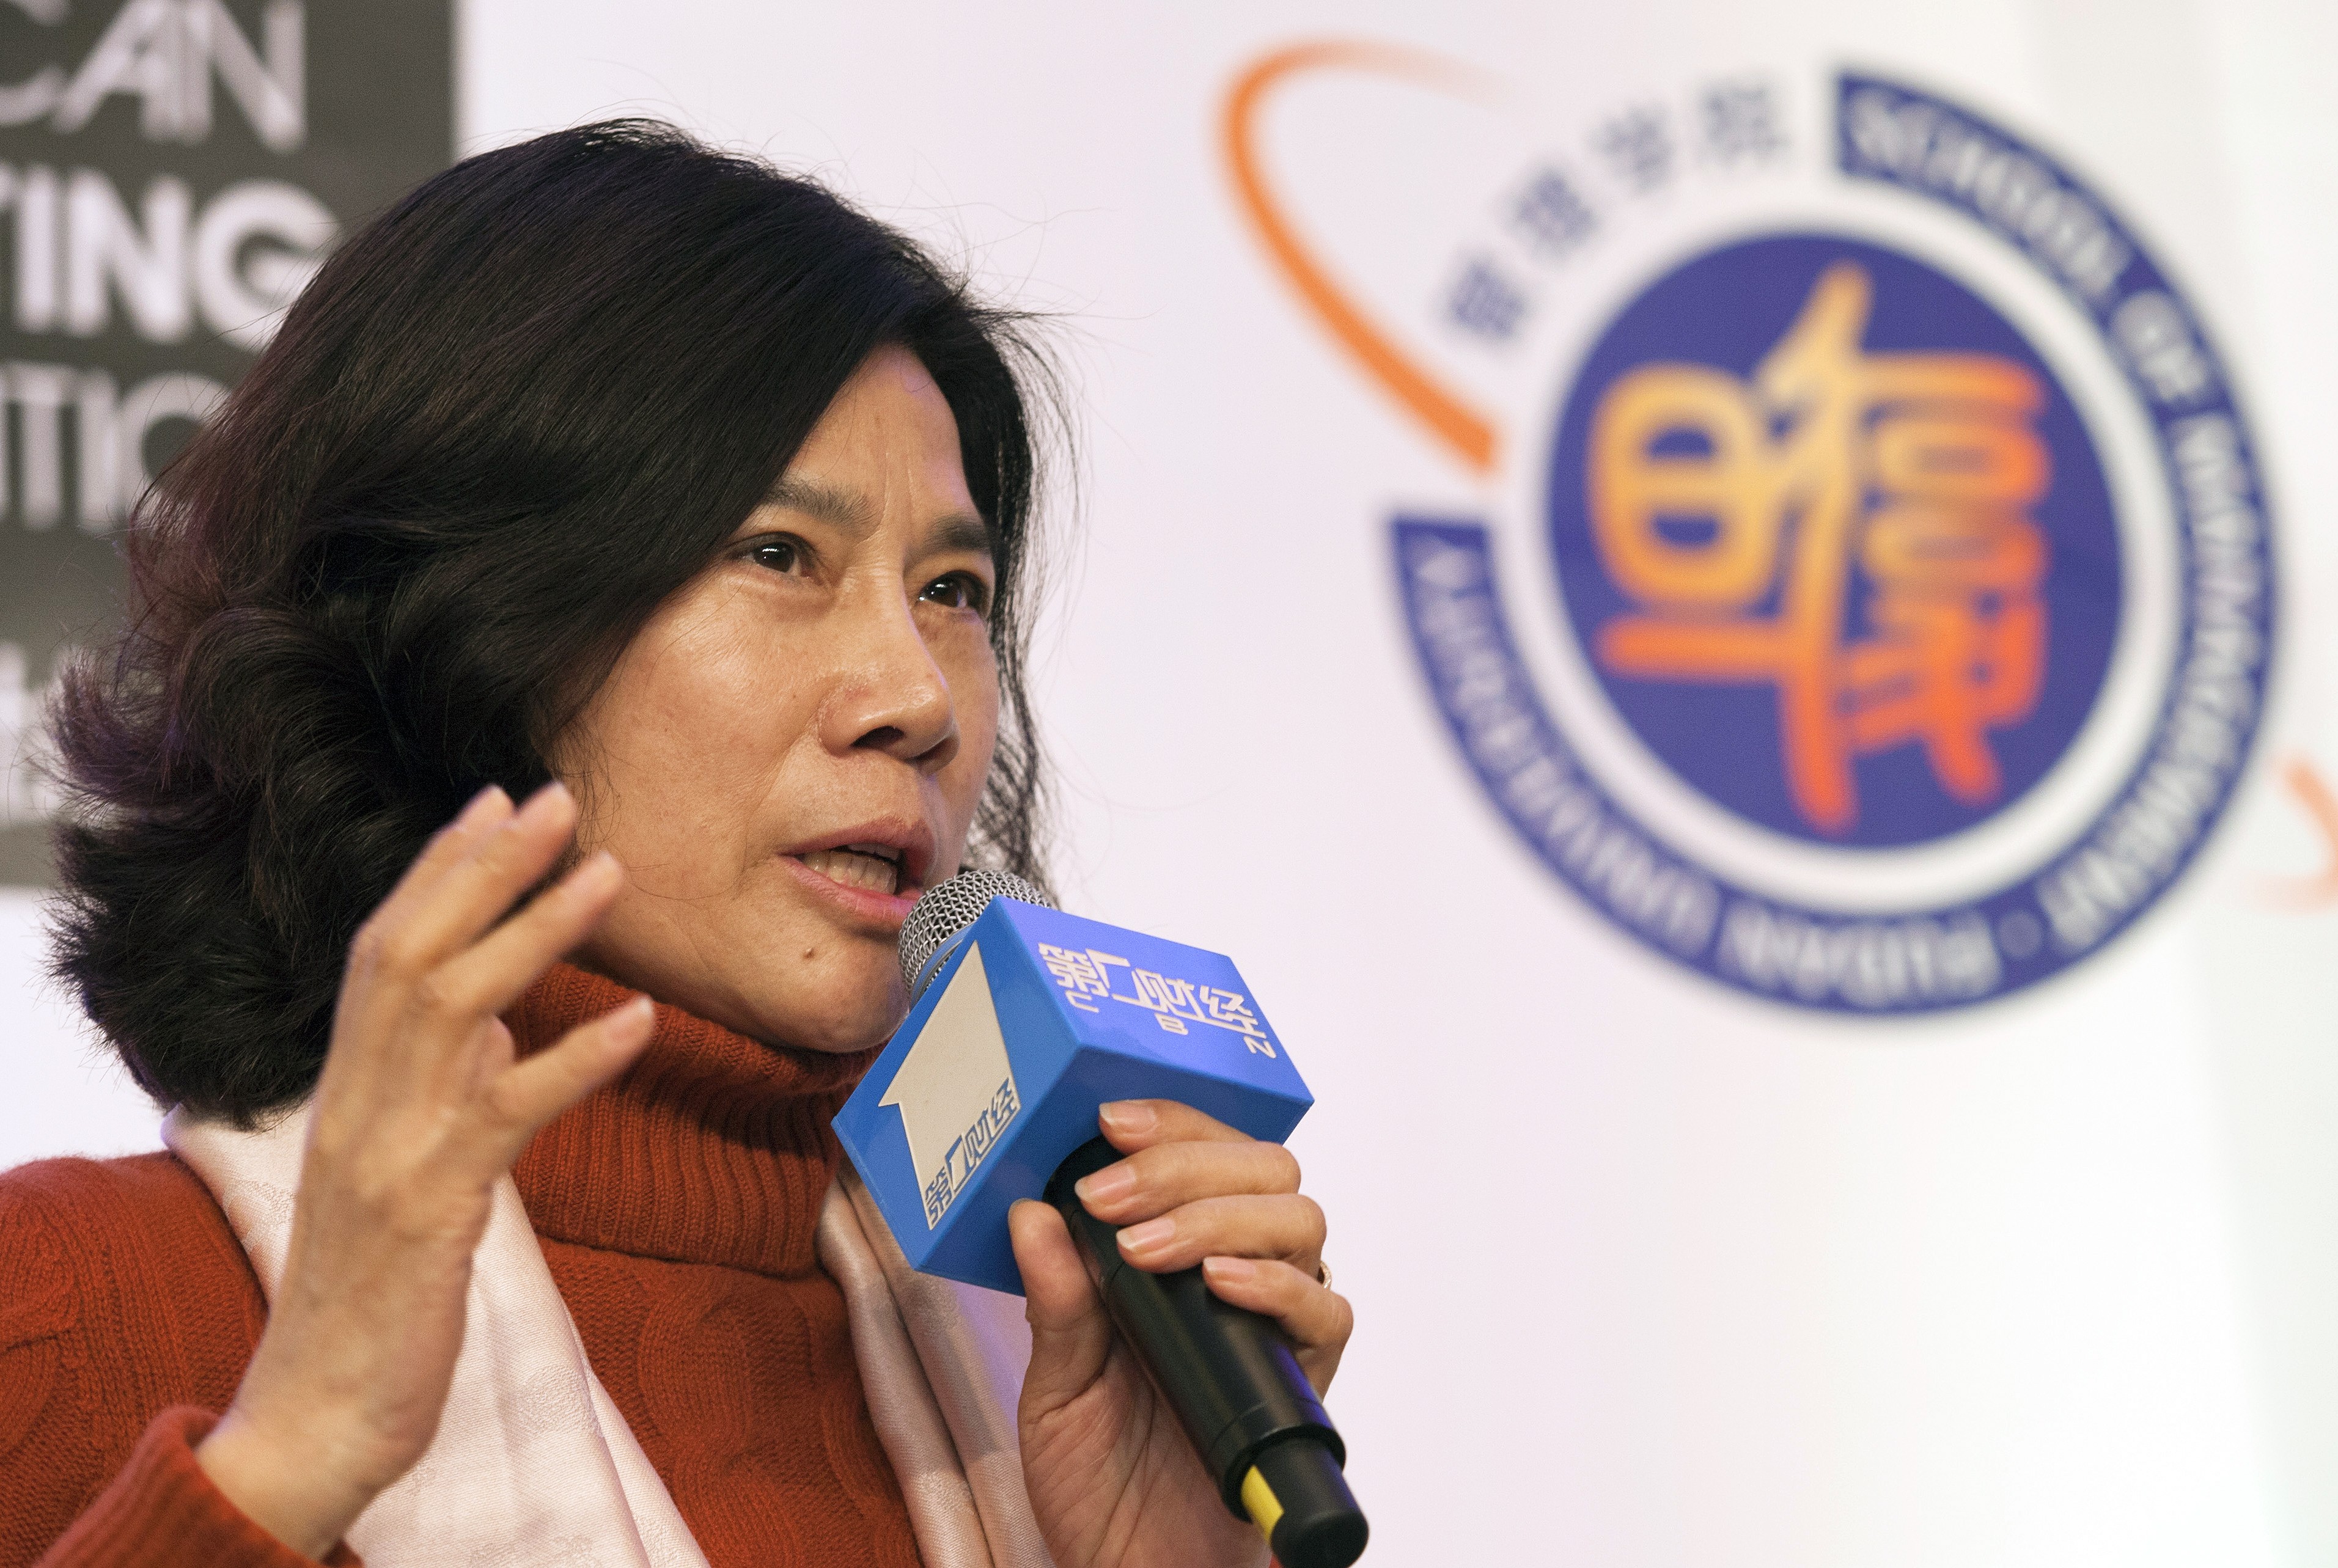 Known for having a ruthless business streak, Gree Electric Appliances chairwoman Dong Mingzhu has been dubbed an ‘air con queen’, ‘iron lady’ and wrote a book called Regretless Pursuit.